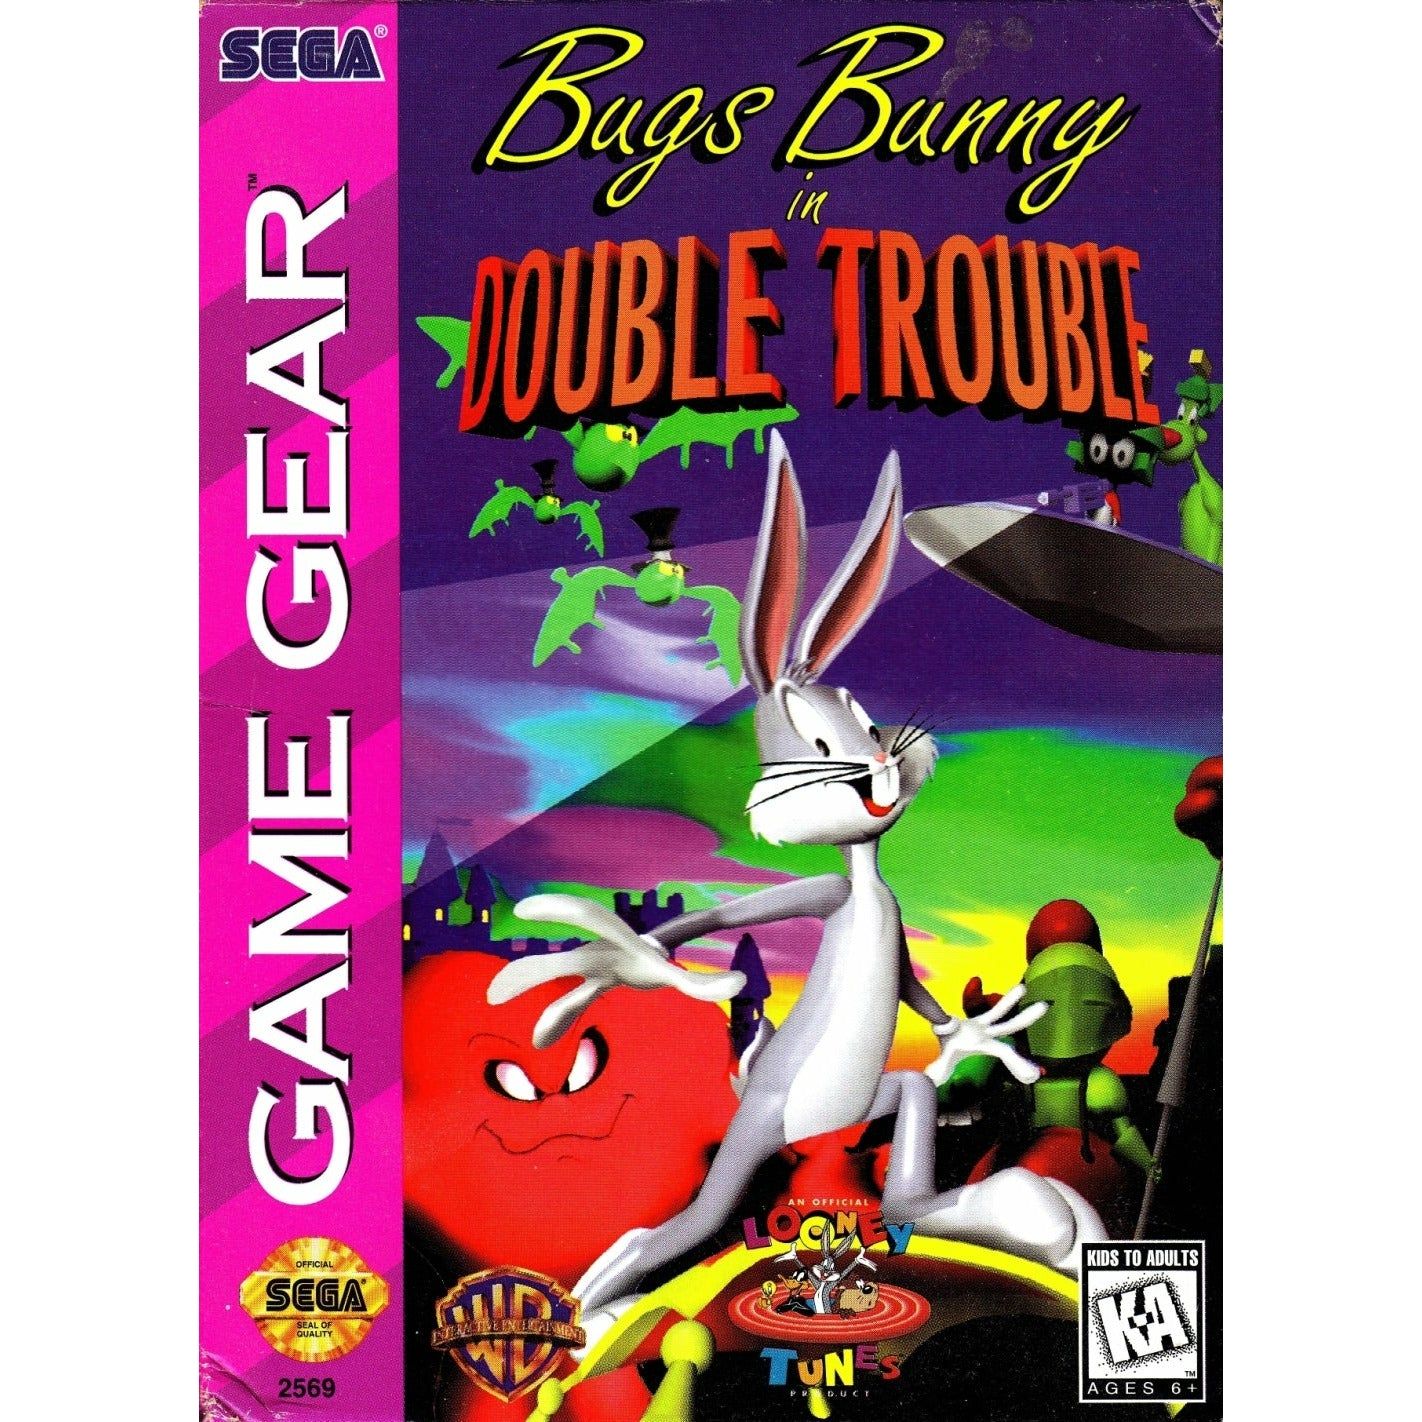 Gamegear - Bugs Bunny In Double Trouble (Cartridge Only)